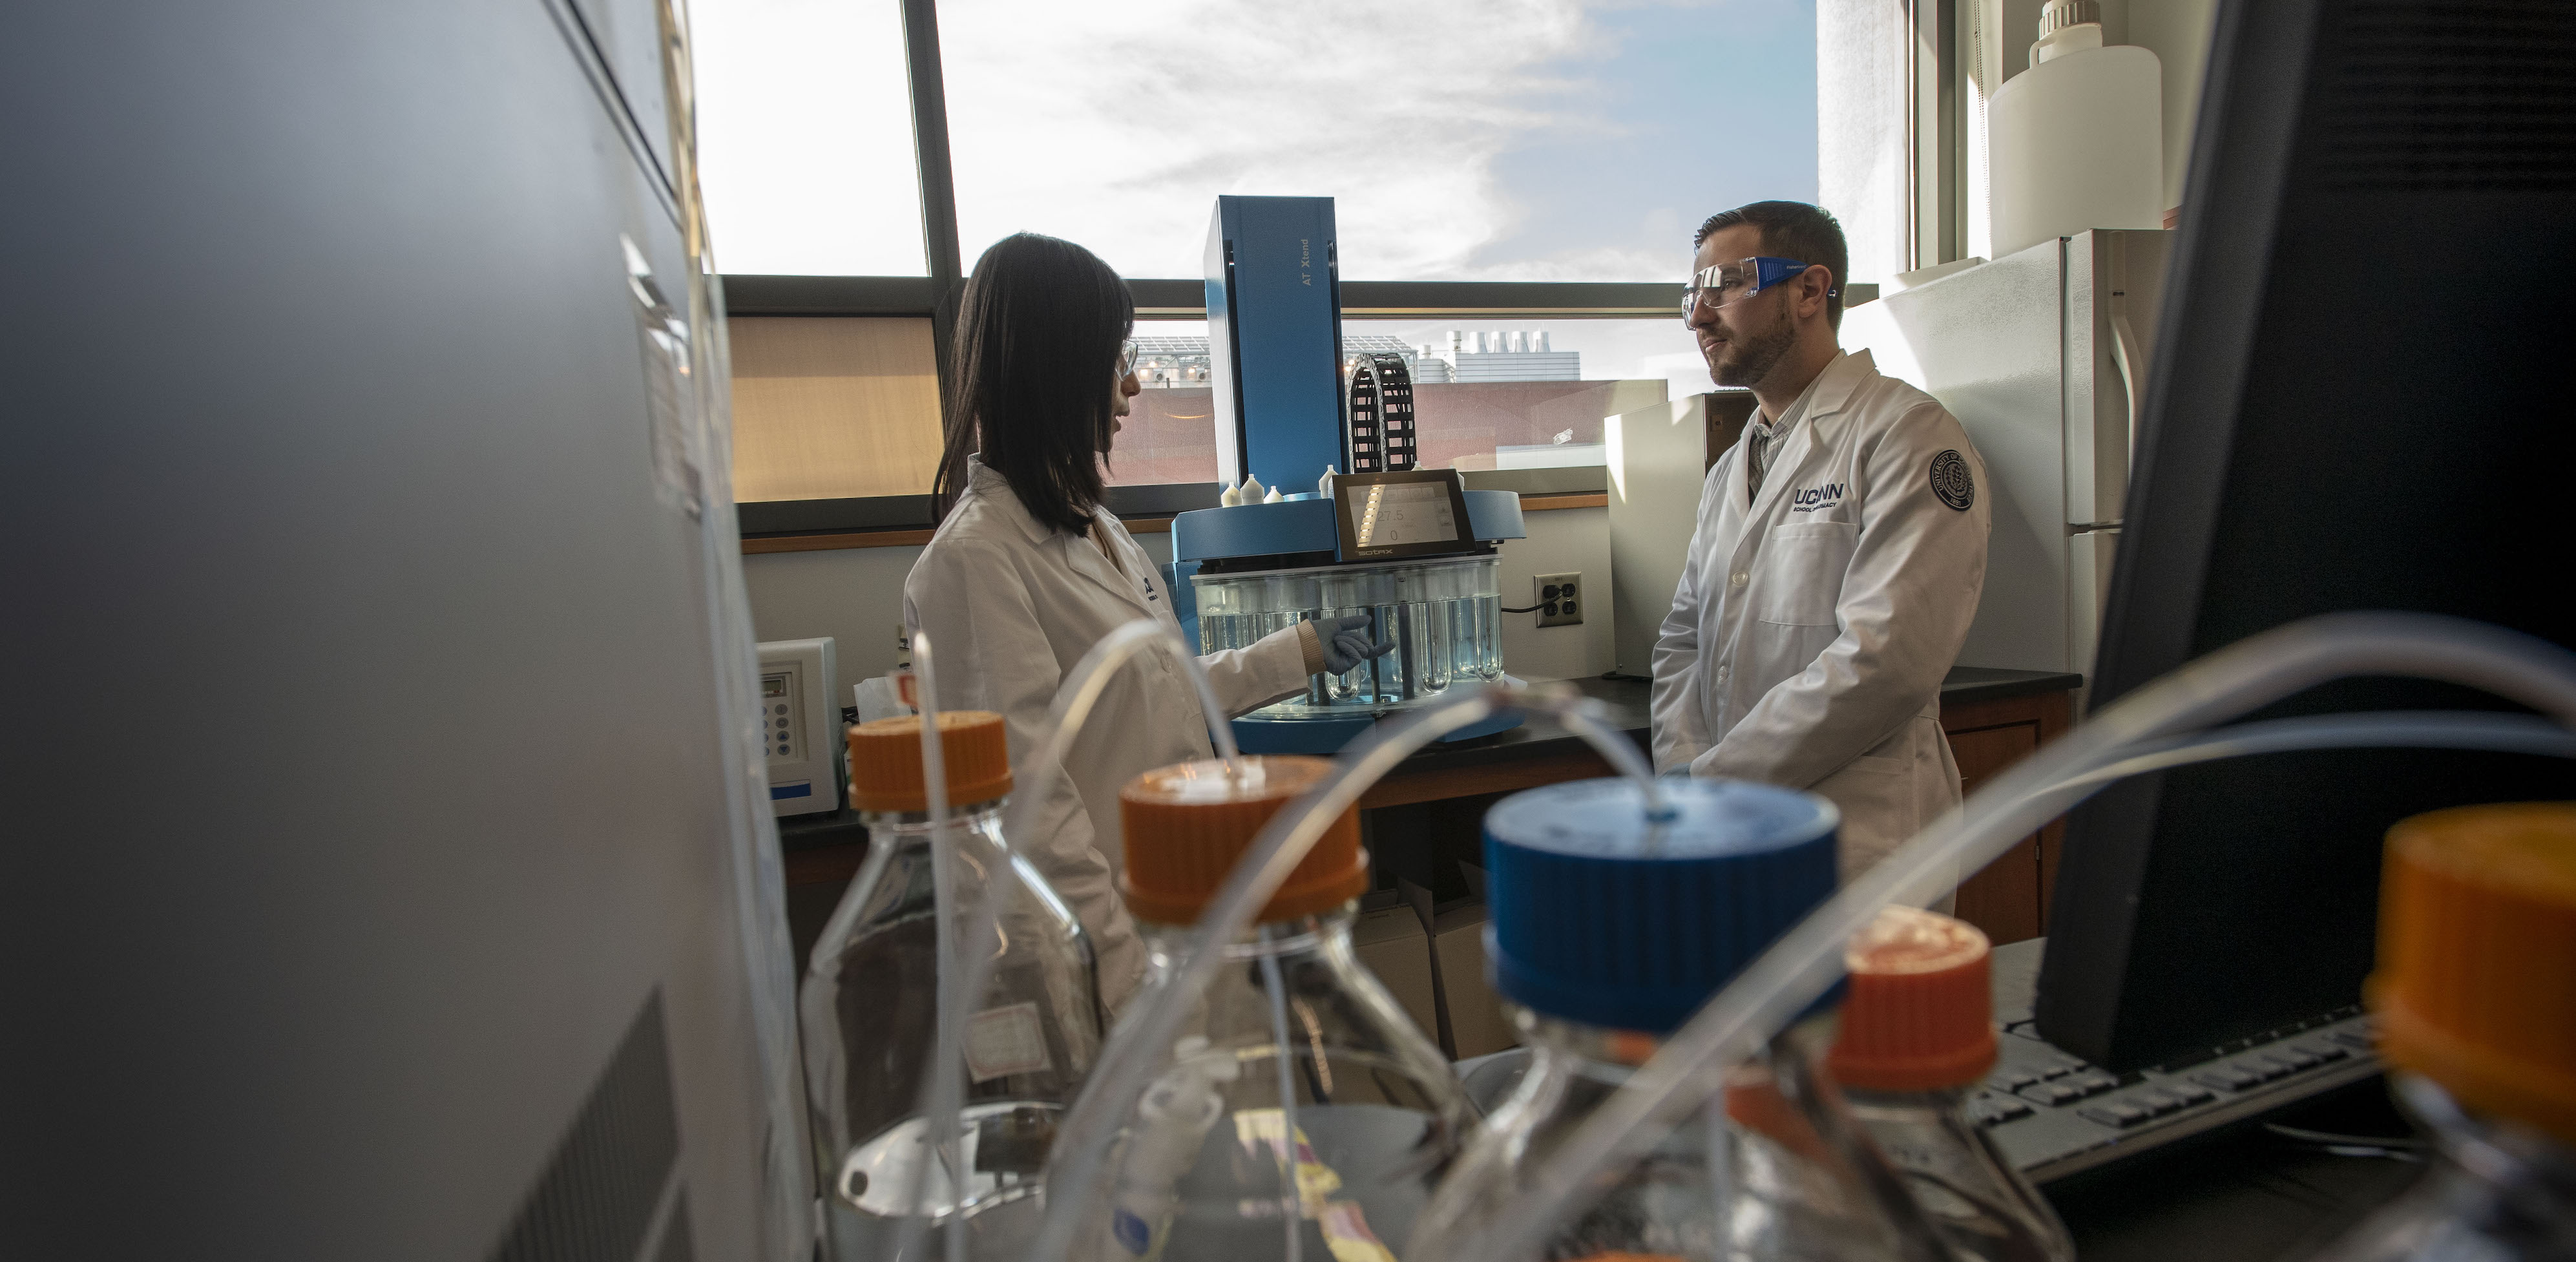 Faculty member Xiuling Lu speaks with a student in a laboratory inside the UConn School of Pharmacy